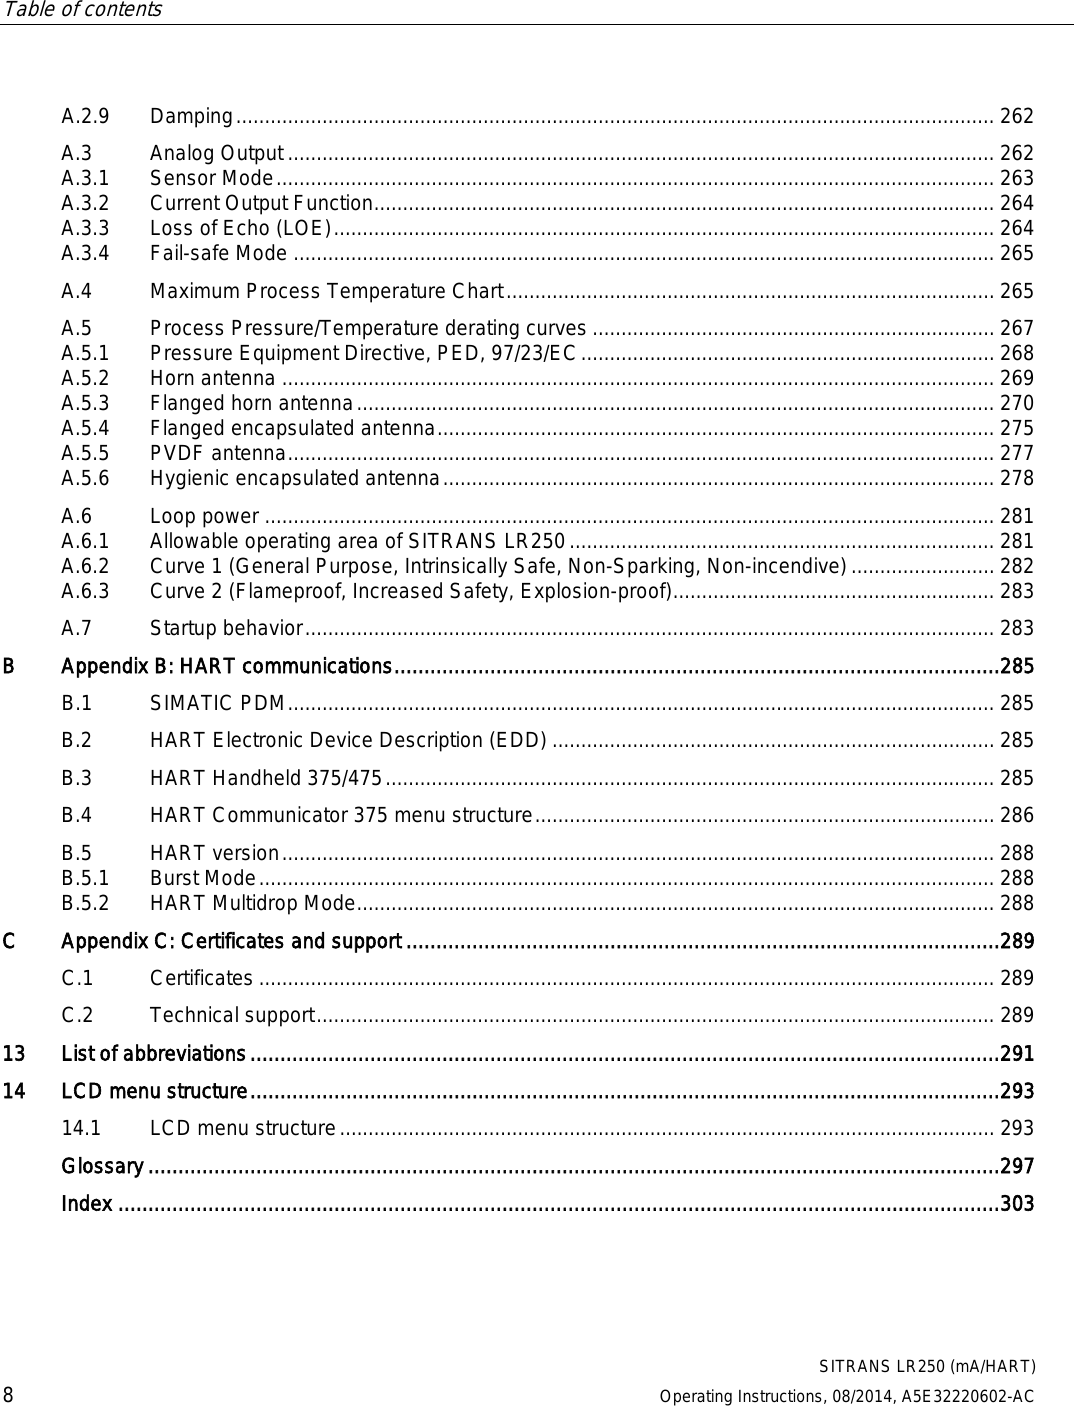 Table of contents      SITRANS LR250 (mA/HART) 8 Operating Instructions, 08/2014, A5E32220602-AC A.2.9 Damping .................................................................................................................................... 262 A.3 Analog Output ........................................................................................................................... 262 A.3.1 Sensor Mode ............................................................................................................................. 263 A.3.2 Current Output Function ............................................................................................................ 264 A.3.3 Loss of Echo (LOE) ................................................................................................................... 264 A.3.4 Fail-safe Mode .......................................................................................................................... 265 A.4 Maximum Process Temperature Chart ..................................................................................... 265 A.5 Process Pressure/Temperature derating curves ...................................................................... 267 A.5.1 Pressure Equipment Directive, PED, 97/23/EC ........................................................................ 268 A.5.2 Horn antenna ............................................................................................................................ 269 A.5.3 Flanged horn antenna ............................................................................................................... 270 A.5.4 Flanged encapsulated antenna ................................................................................................. 275 A.5.5 PVDF antenna ........................................................................................................................... 277 A.5.6 Hygienic encapsulated antenna ................................................................................................ 278 A.6 Loop power ............................................................................................................................... 281 A.6.1 Allowable operating area of SITRANS LR250 .......................................................................... 281 A.6.2 Curve 1 (General Purpose, Intrinsically Safe, Non-Sparking, Non-incendive) ......................... 282 A.6.3 Curve 2 (Flameproof, Increased Safety, Explosion-proof) ........................................................ 283 A.7 Startup behavior ........................................................................................................................ 283 B  Appendix B: HART communications ..................................................................................................... 285 B.1 SIMATIC PDM ........................................................................................................................... 285 B.2 HART Electronic Device Description (EDD) ............................................................................. 285 B.3 HART Handheld 375/475 .......................................................................................................... 285 B.4 HART Communicator 375 menu structure ................................................................................ 286 B.5 HART version ............................................................................................................................ 288 B.5.1 Burst Mode ................................................................................................................................ 288 B.5.2 HART Multidrop Mode ............................................................................................................... 288 C  Appendix C: Certificates and support ................................................................................................... 289 C.1 Certificates ................................................................................................................................ 289 C.2 Technical support ...................................................................................................................... 289 13 List of abbreviations ............................................................................................................................. 291 14 LCD menu structure ............................................................................................................................. 293 14.1 LCD menu structure .................................................................................................................. 293  Glossary .............................................................................................................................................. 297  Index ................................................................................................................................................... 303 